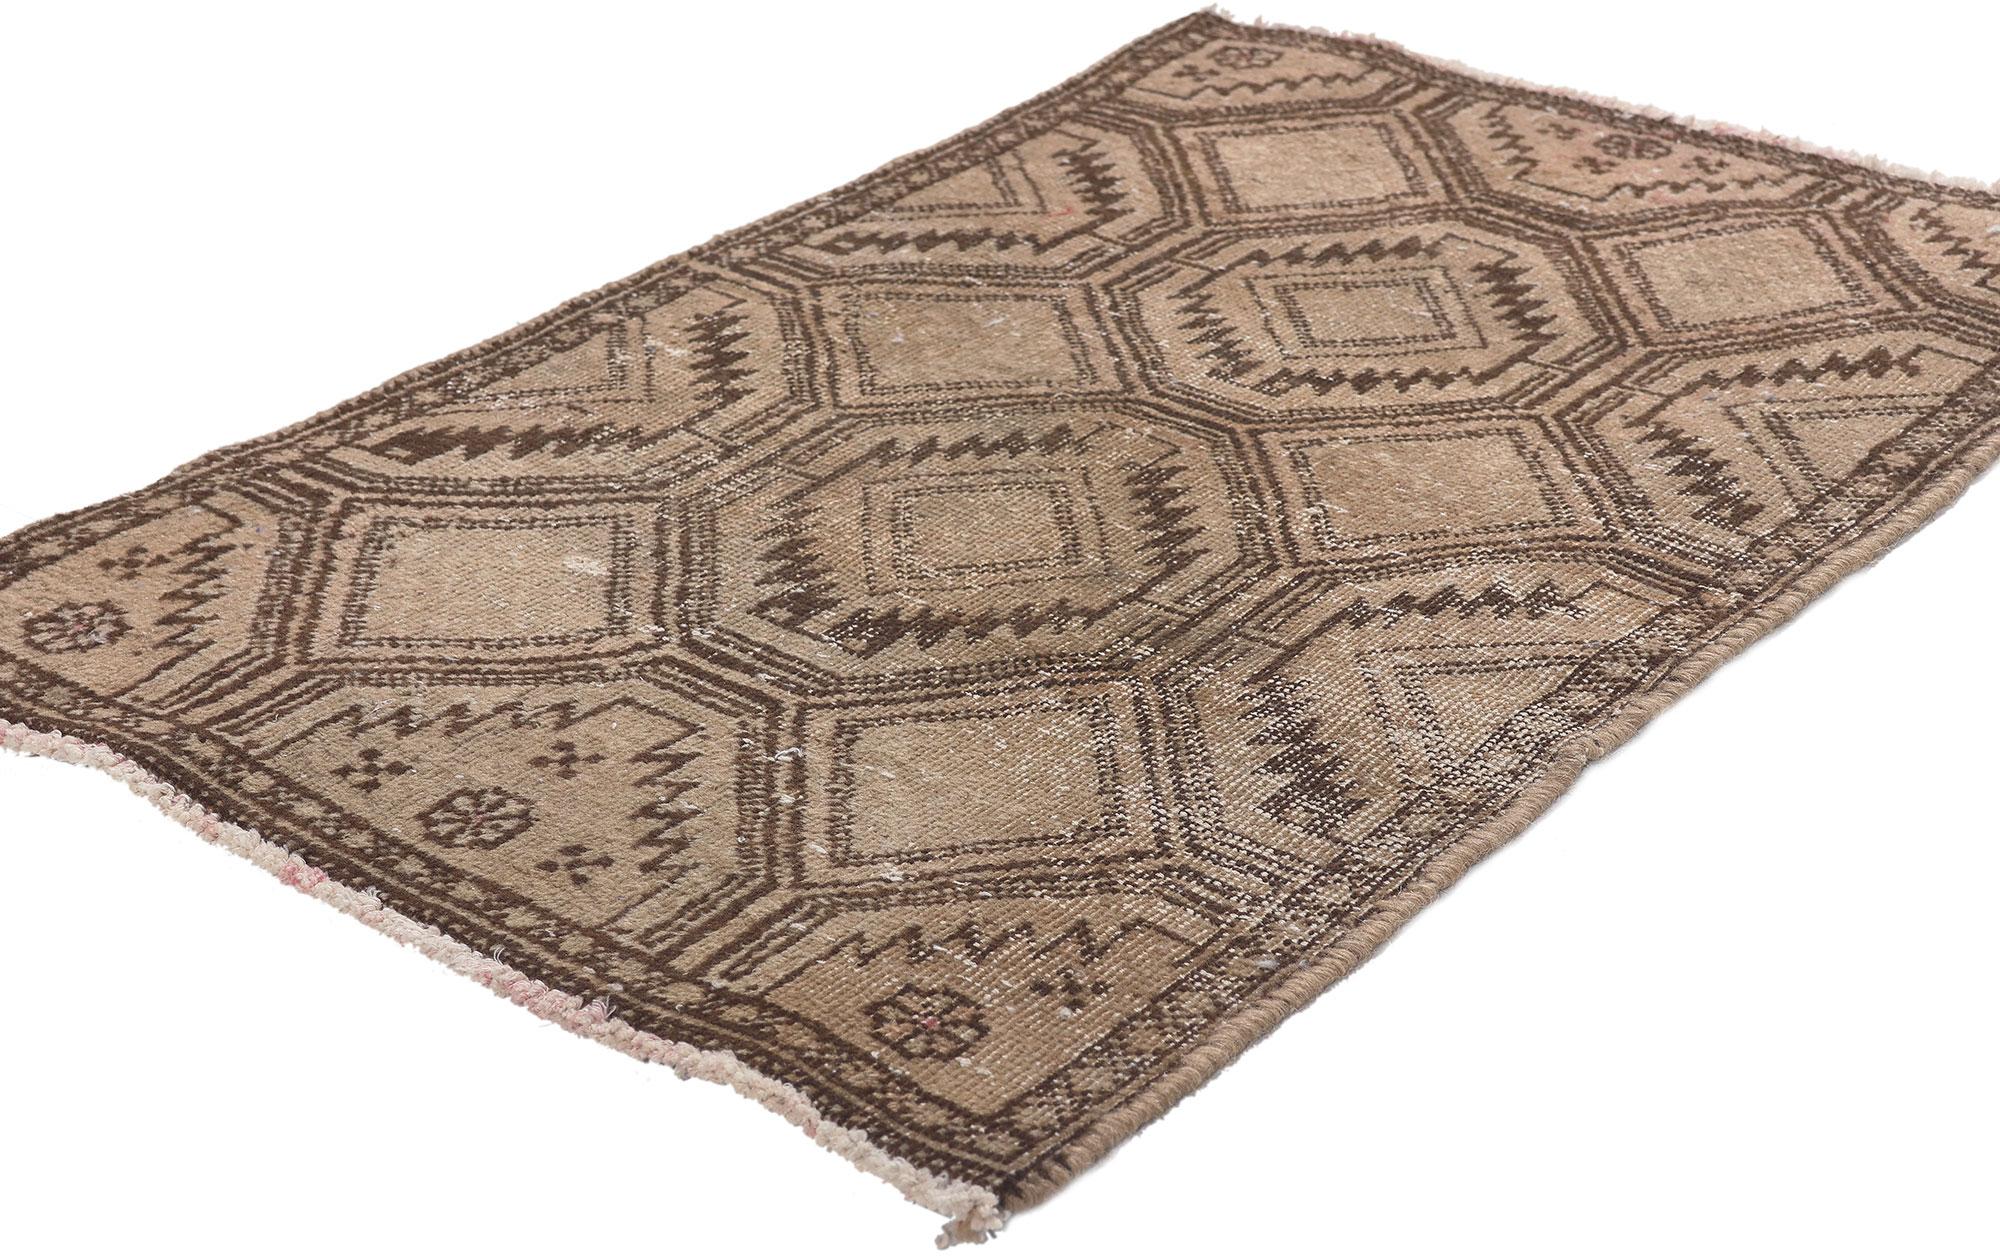 78582 Distressed Antique Persian Tabriz Rug, 01'09 x 02'09. 
Emanating rustic sensibility and weathered nomadic charm, this small antique Persian Tabriz rug is a captivating vision of woven rugged beauty. The octagonal diamond pattern and neutral